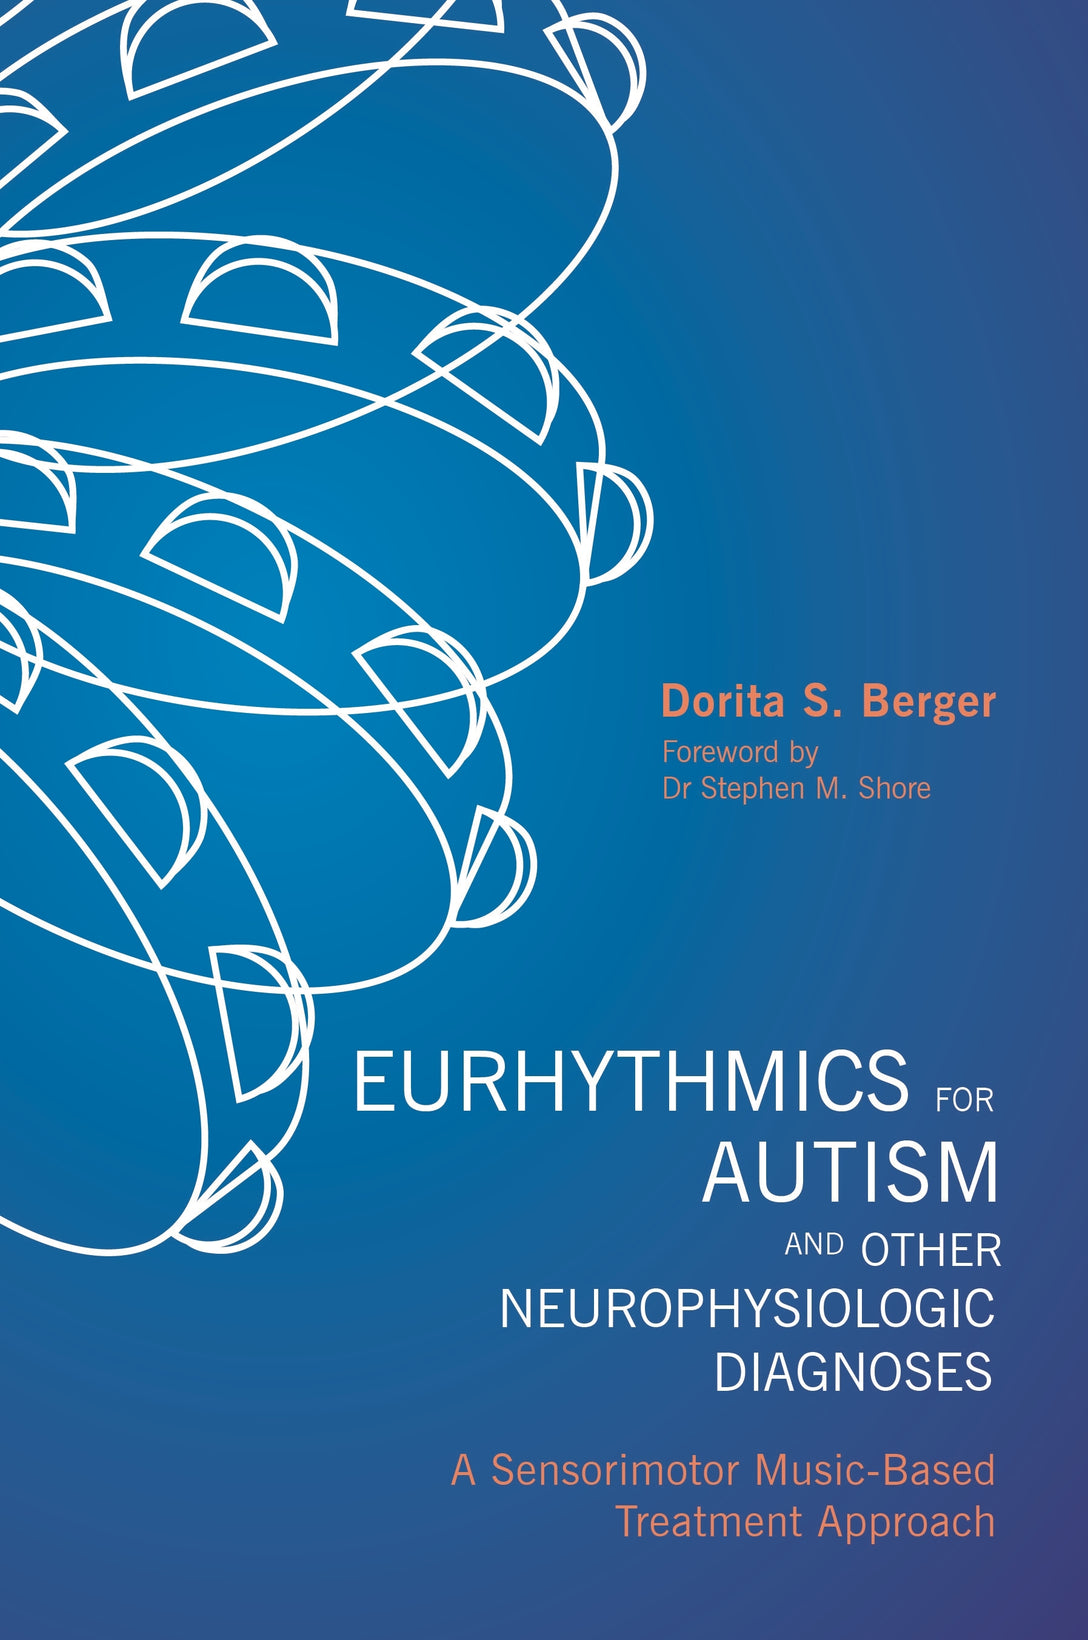 Eurhythmics for Autism and Other Neurophysiologic Diagnoses by Stephen M. Shore, Dorita S. Berger